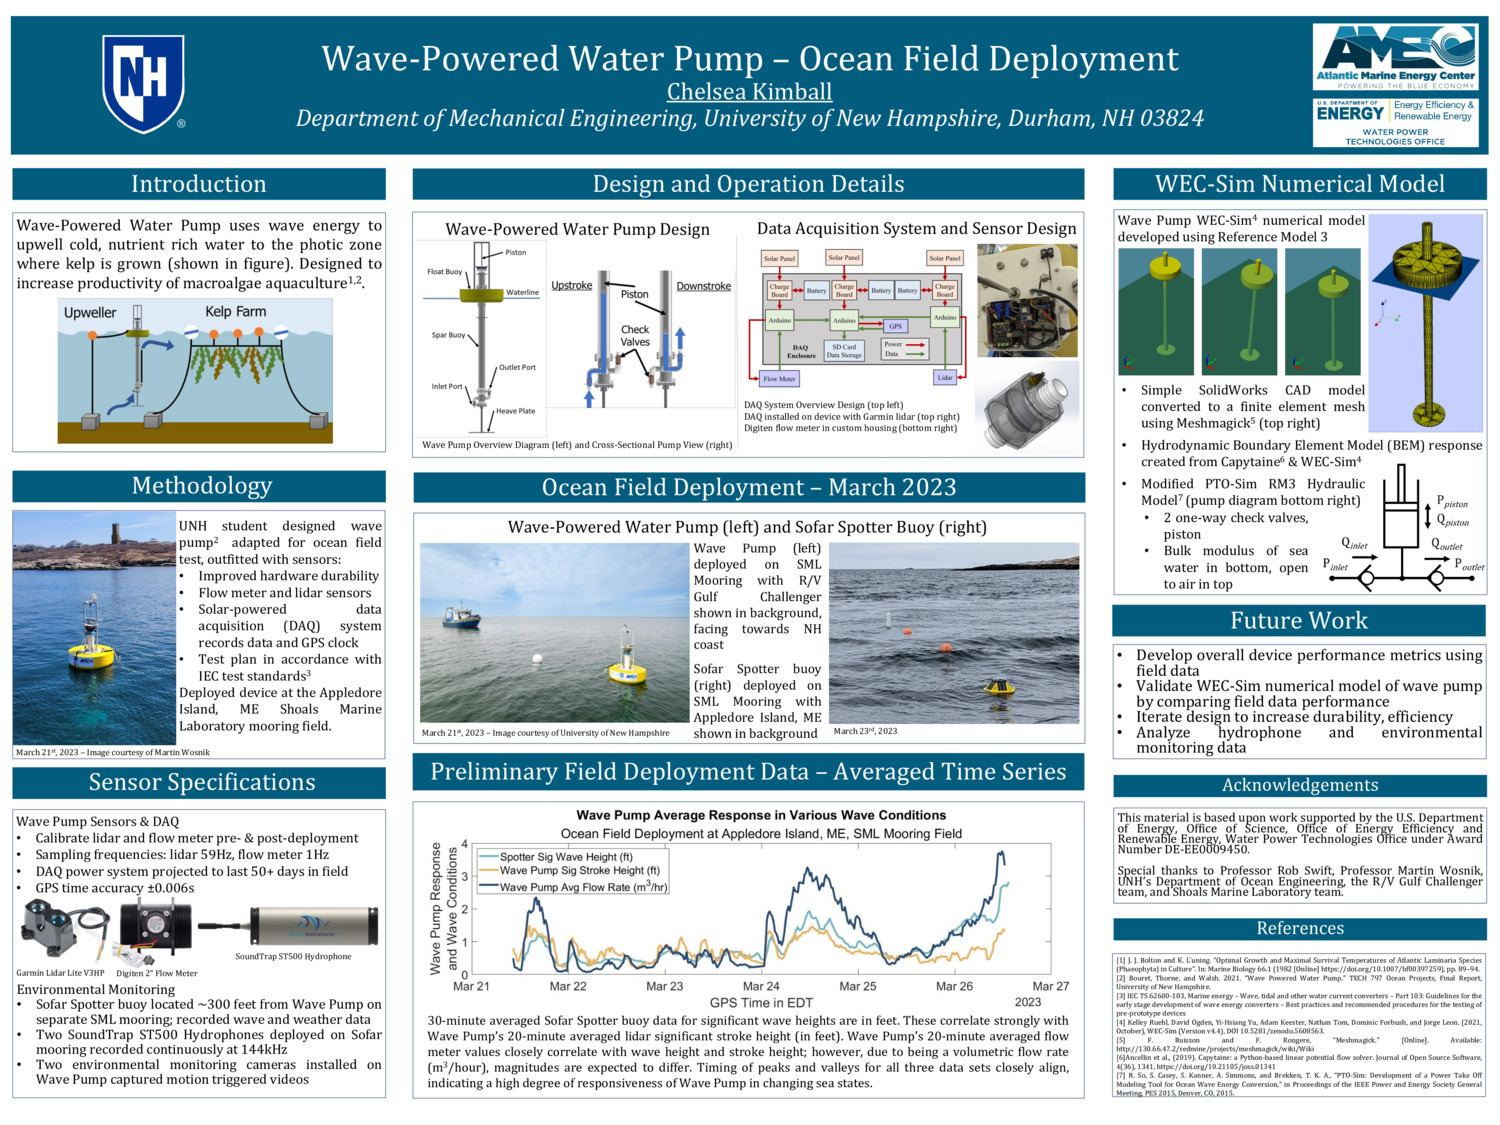 Wave-Powered Water Pump - Ocean Field Deployment by ccz359